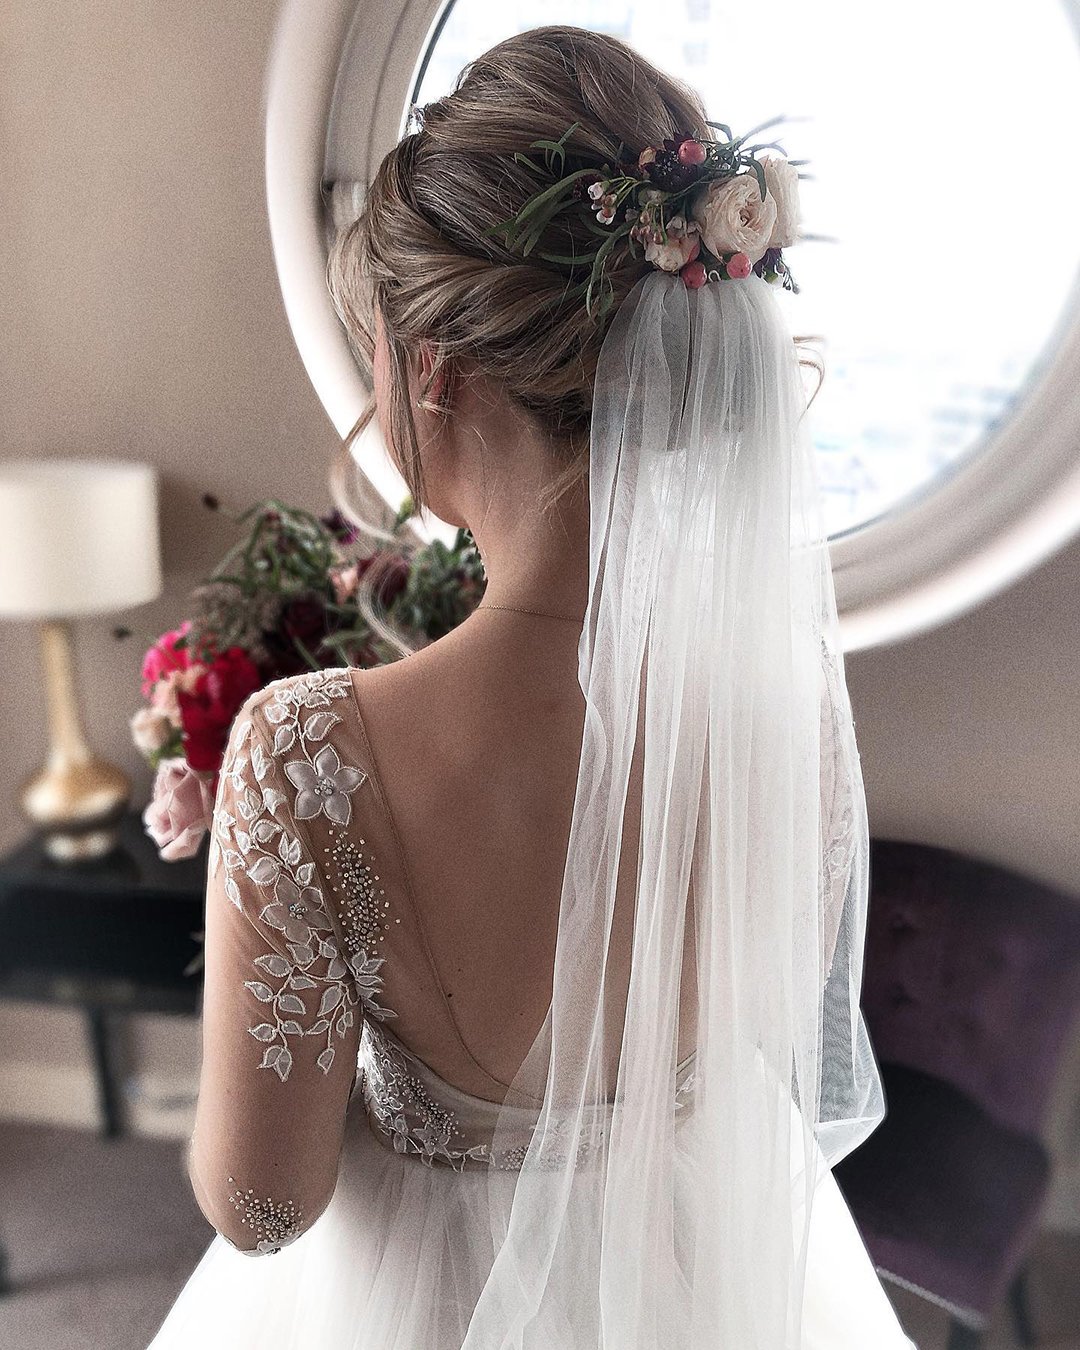 Wedding Hairstyles With Veil Rustic Updo With Flowers ?is Pending Load=1